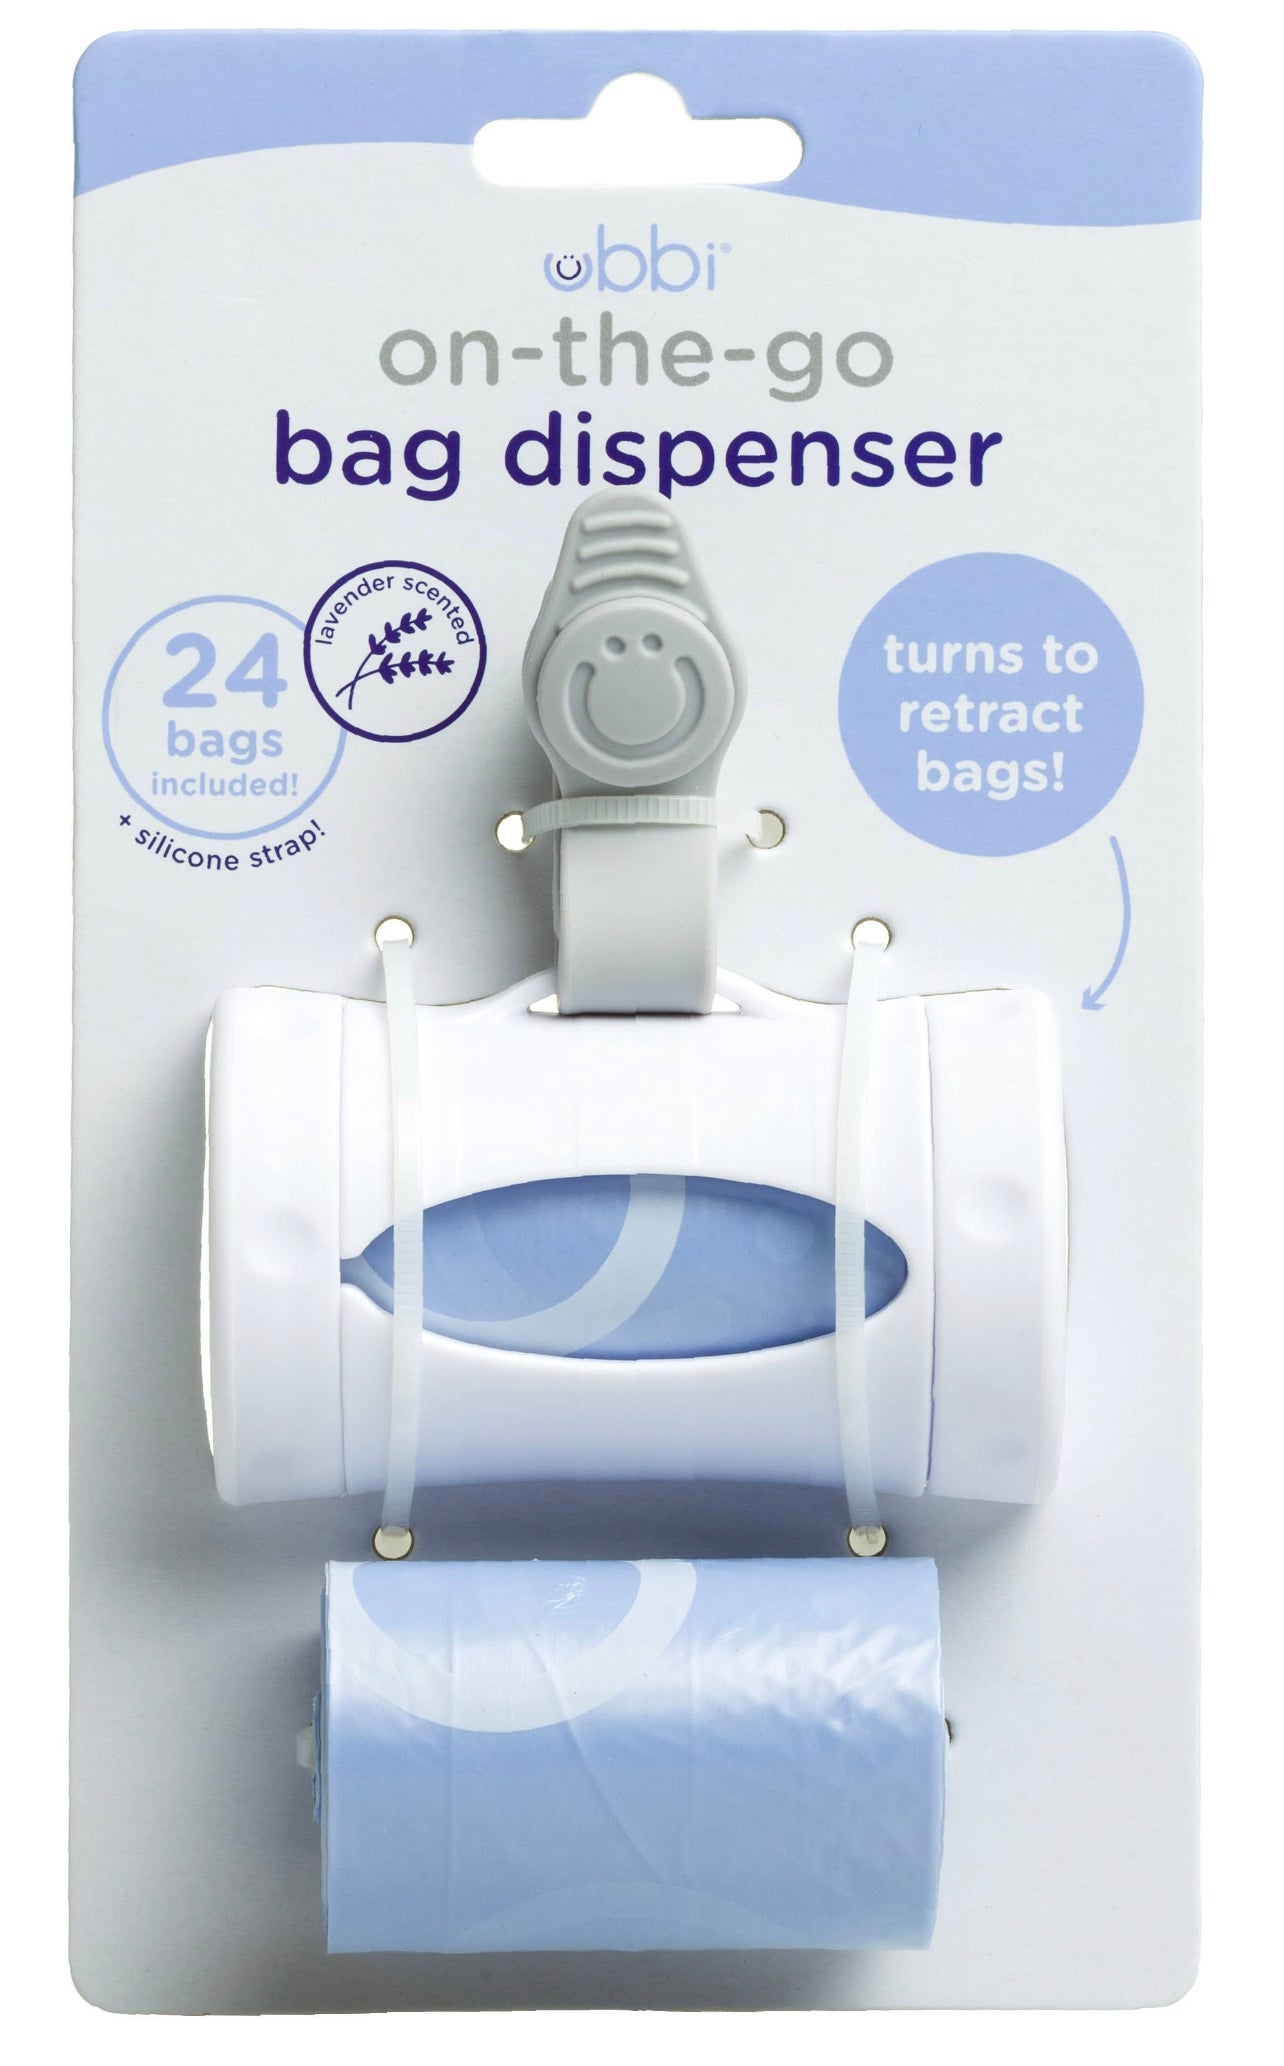 lavender scent diaper bags with dispenser that retracts